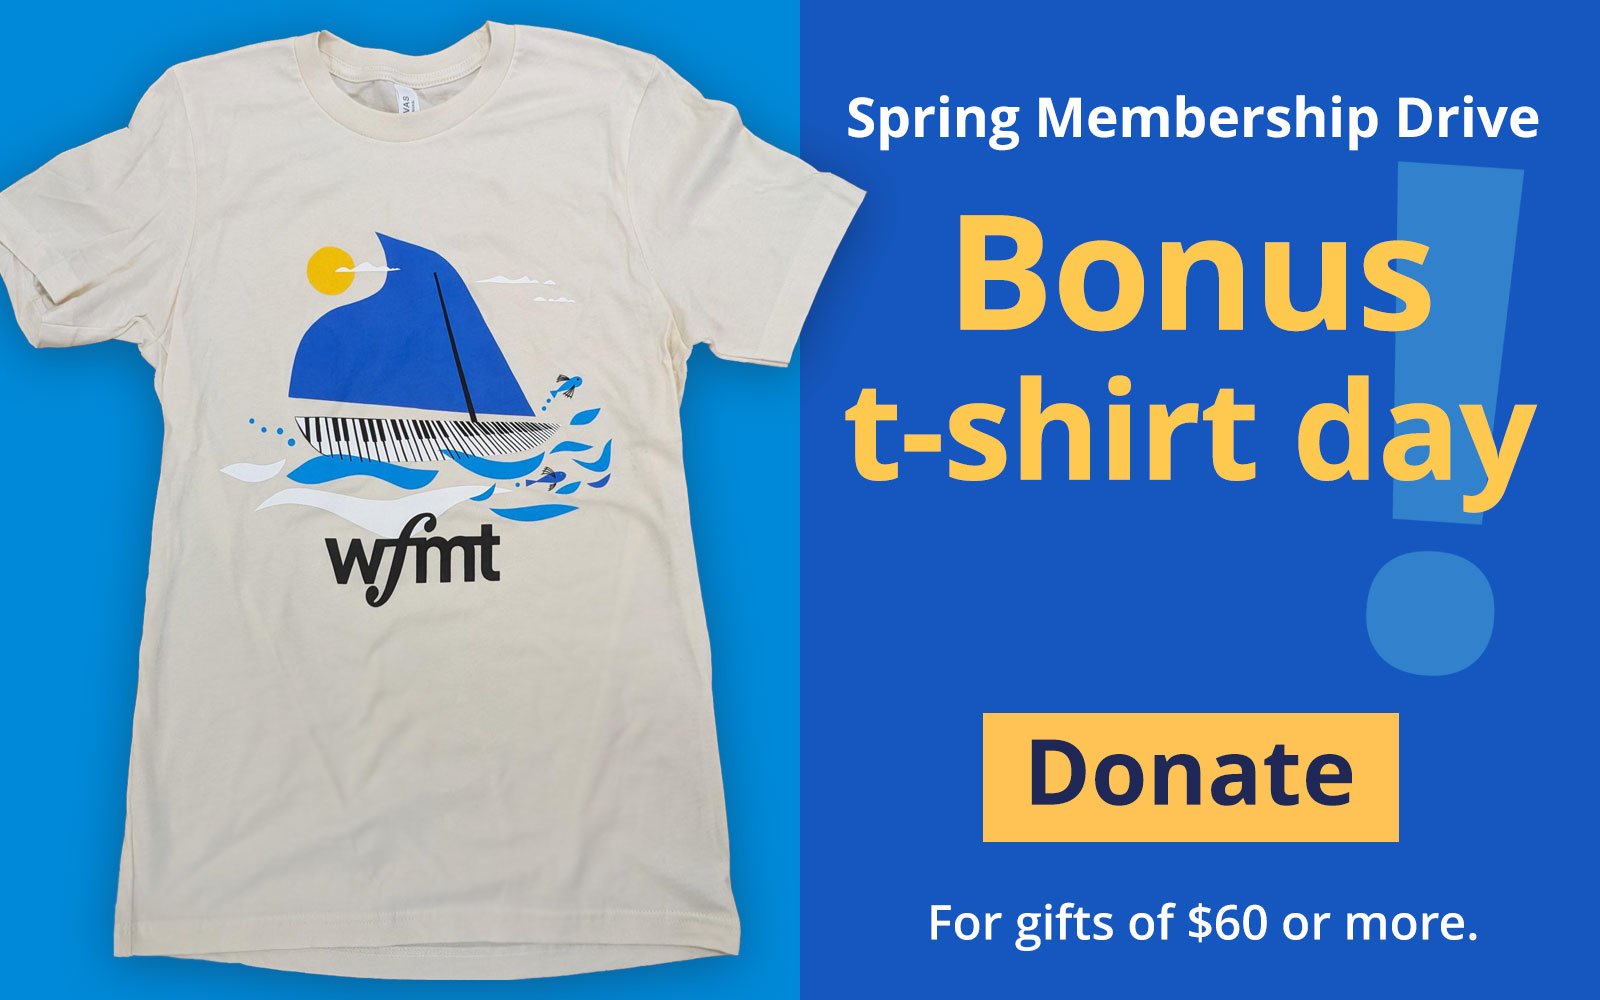 Support the WFMT spring membership drive!